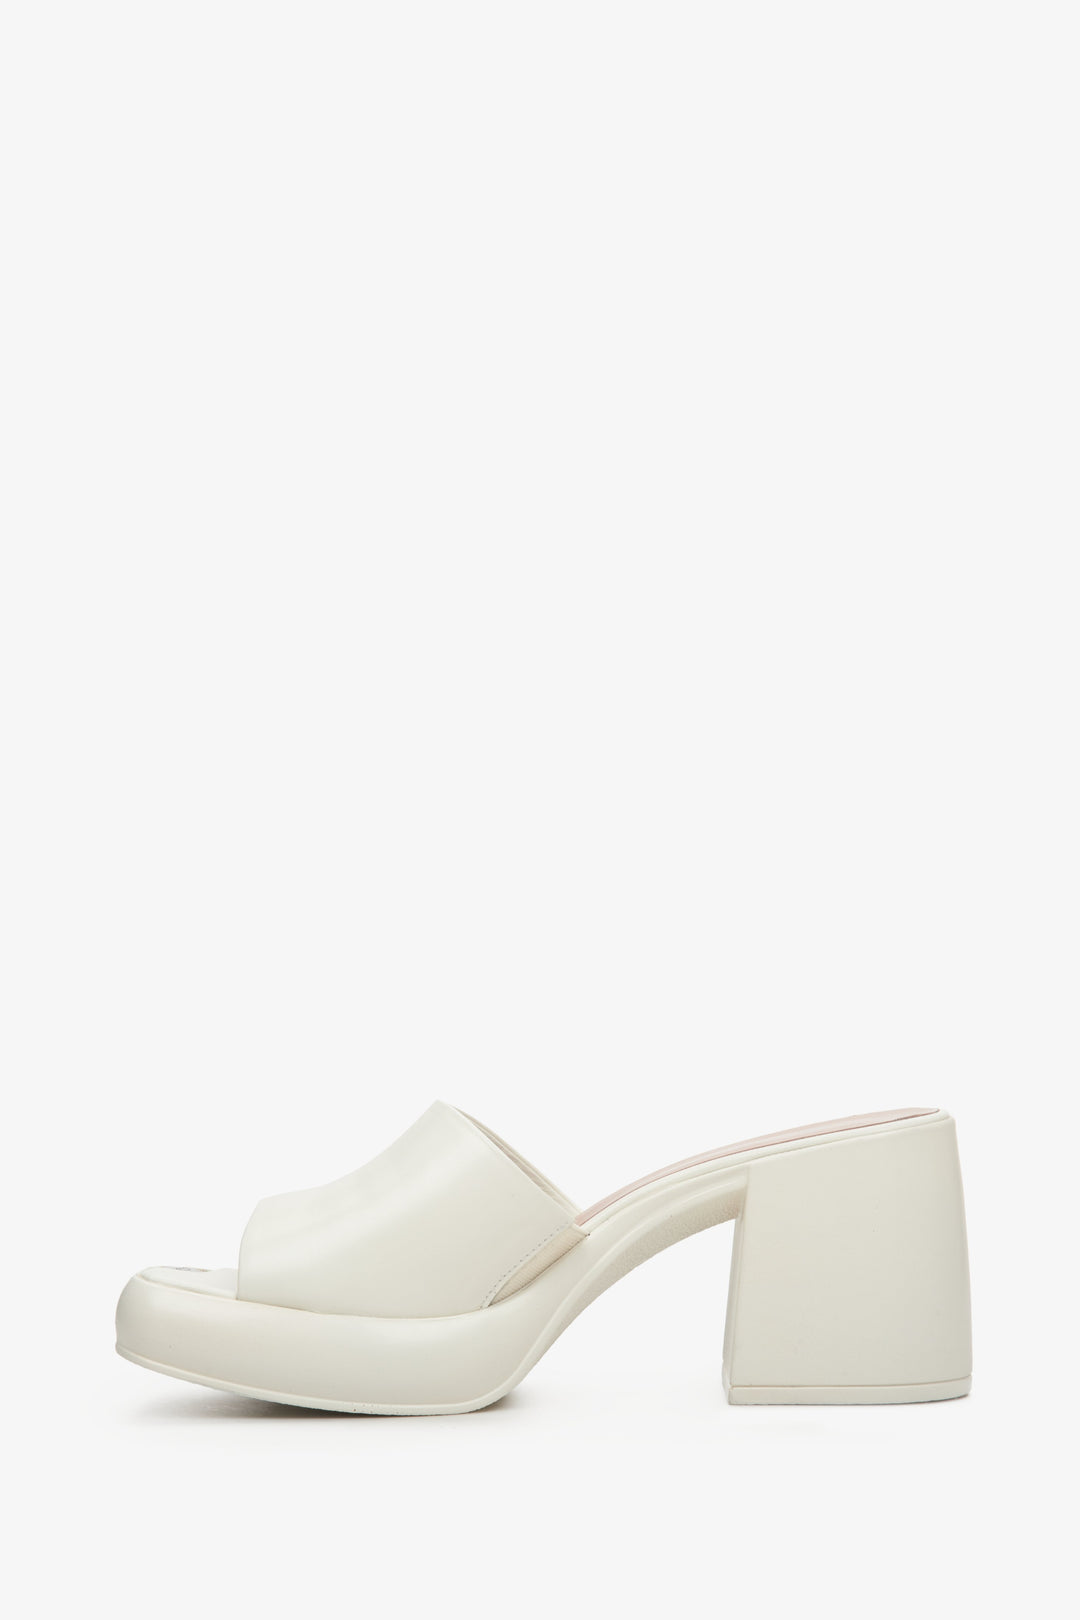 Stylish white mules for women made of natural leather on a square heel - the profile of the shoes.